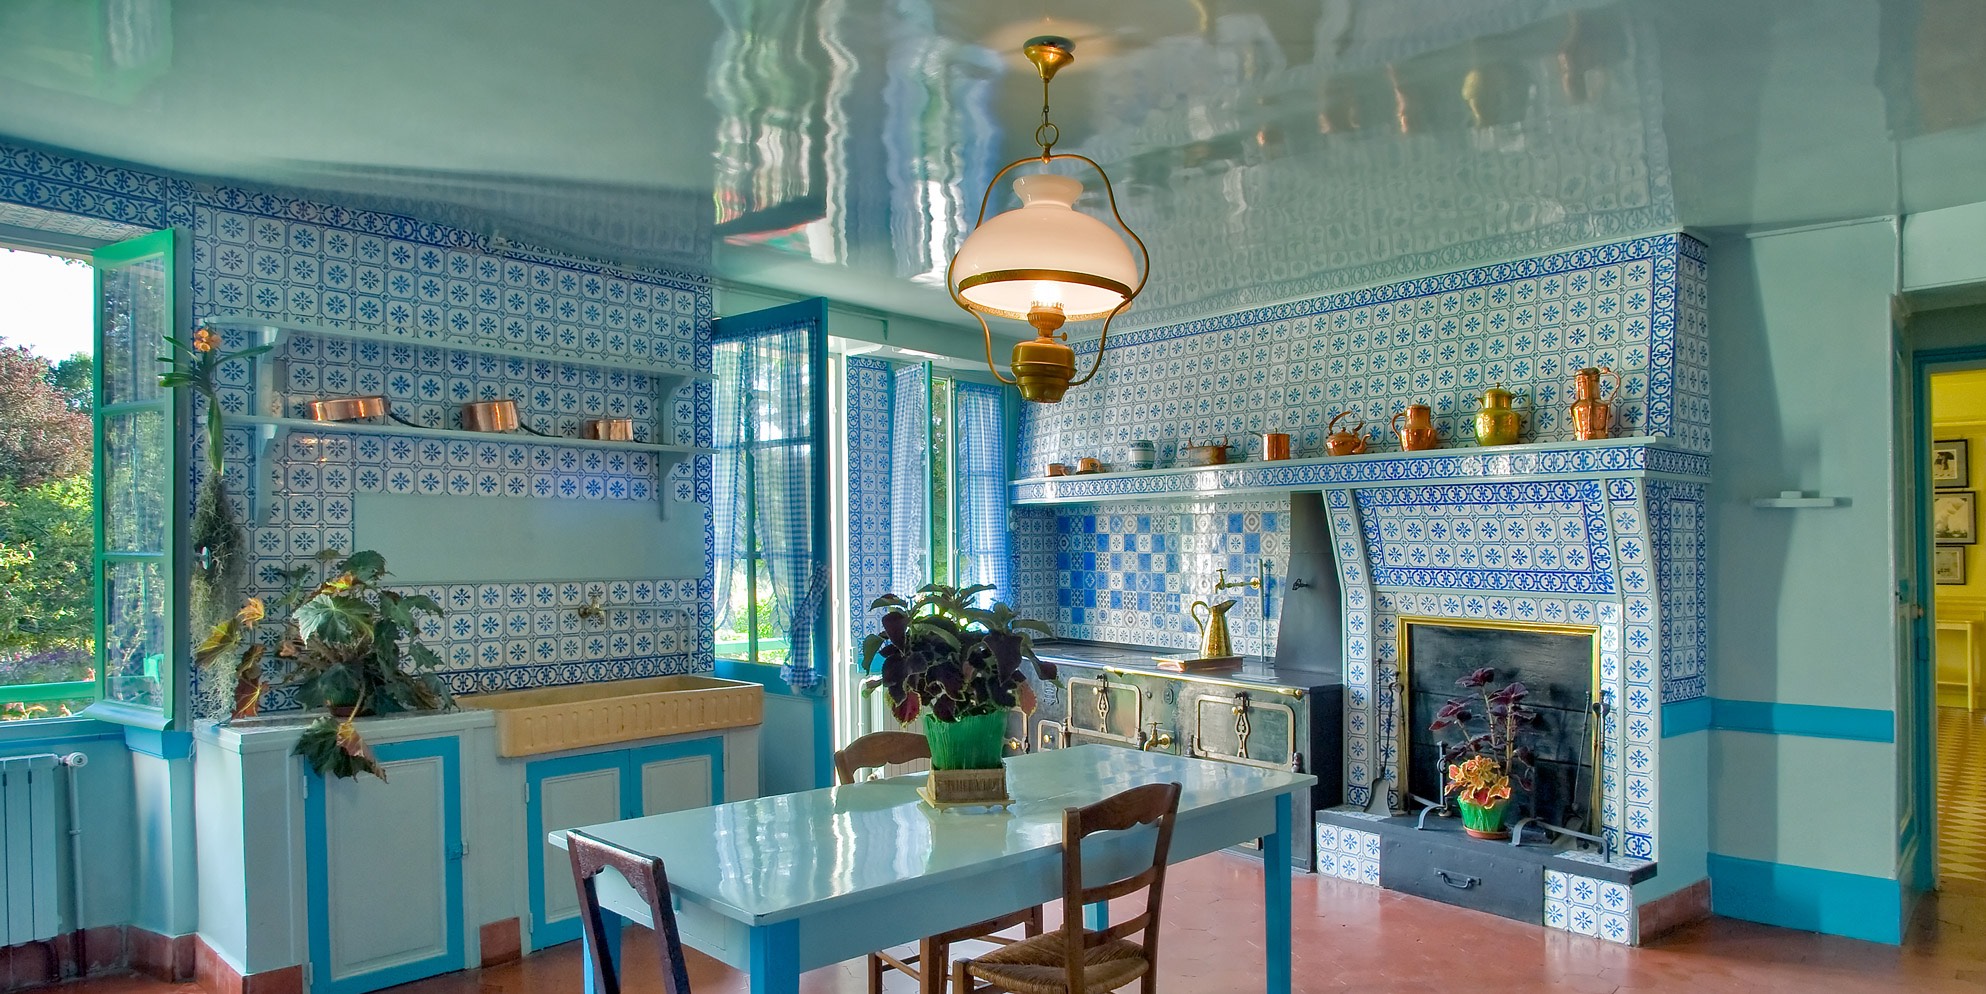 Alice & Claude Monet's restored kitchen in Giverny.